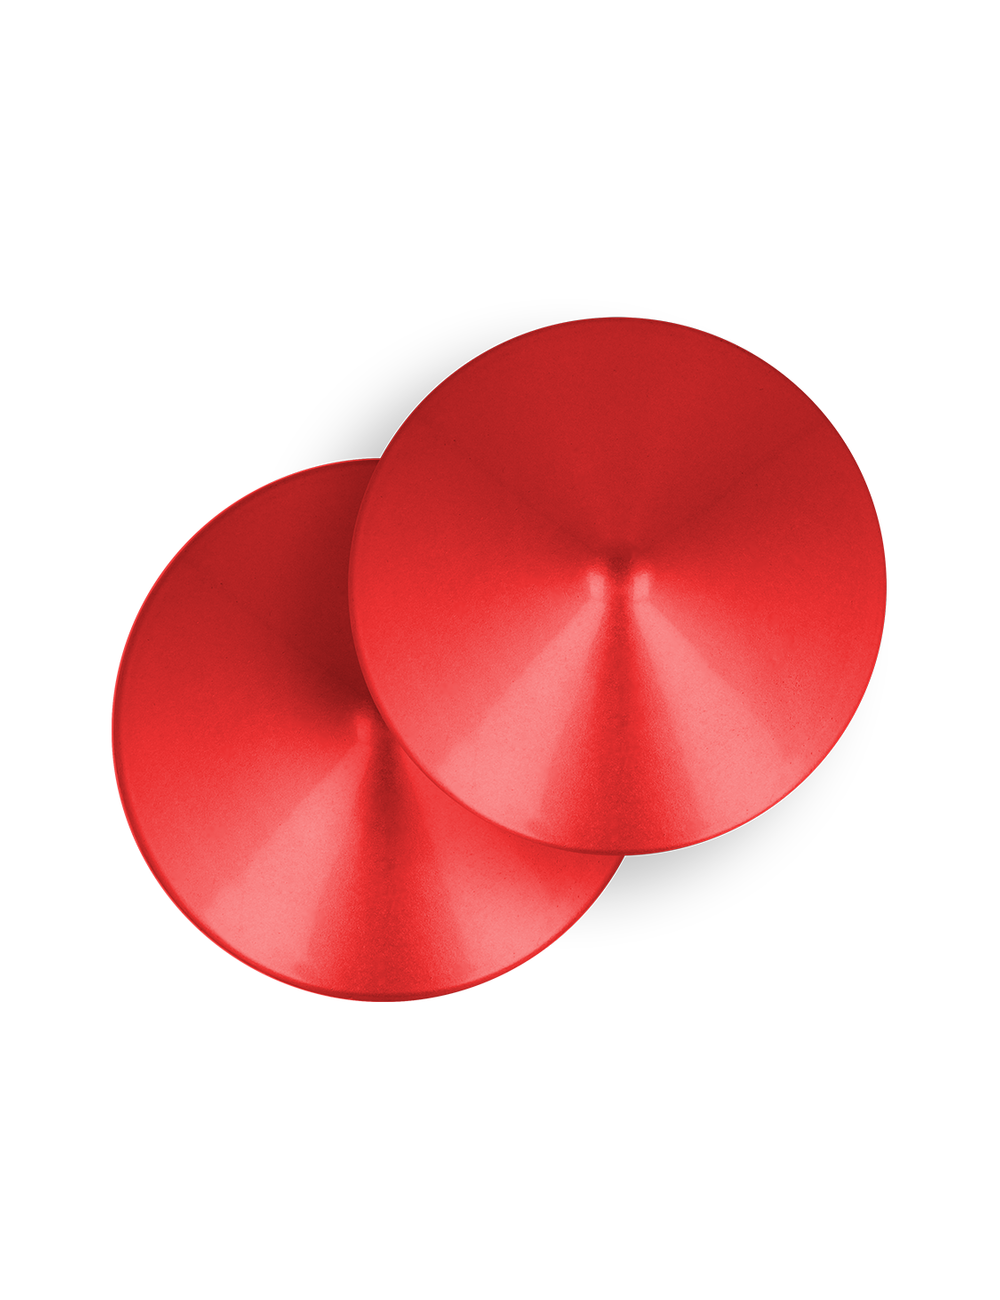 OHMAMA FETISH RED CIRCLE NIPPLE COVERS